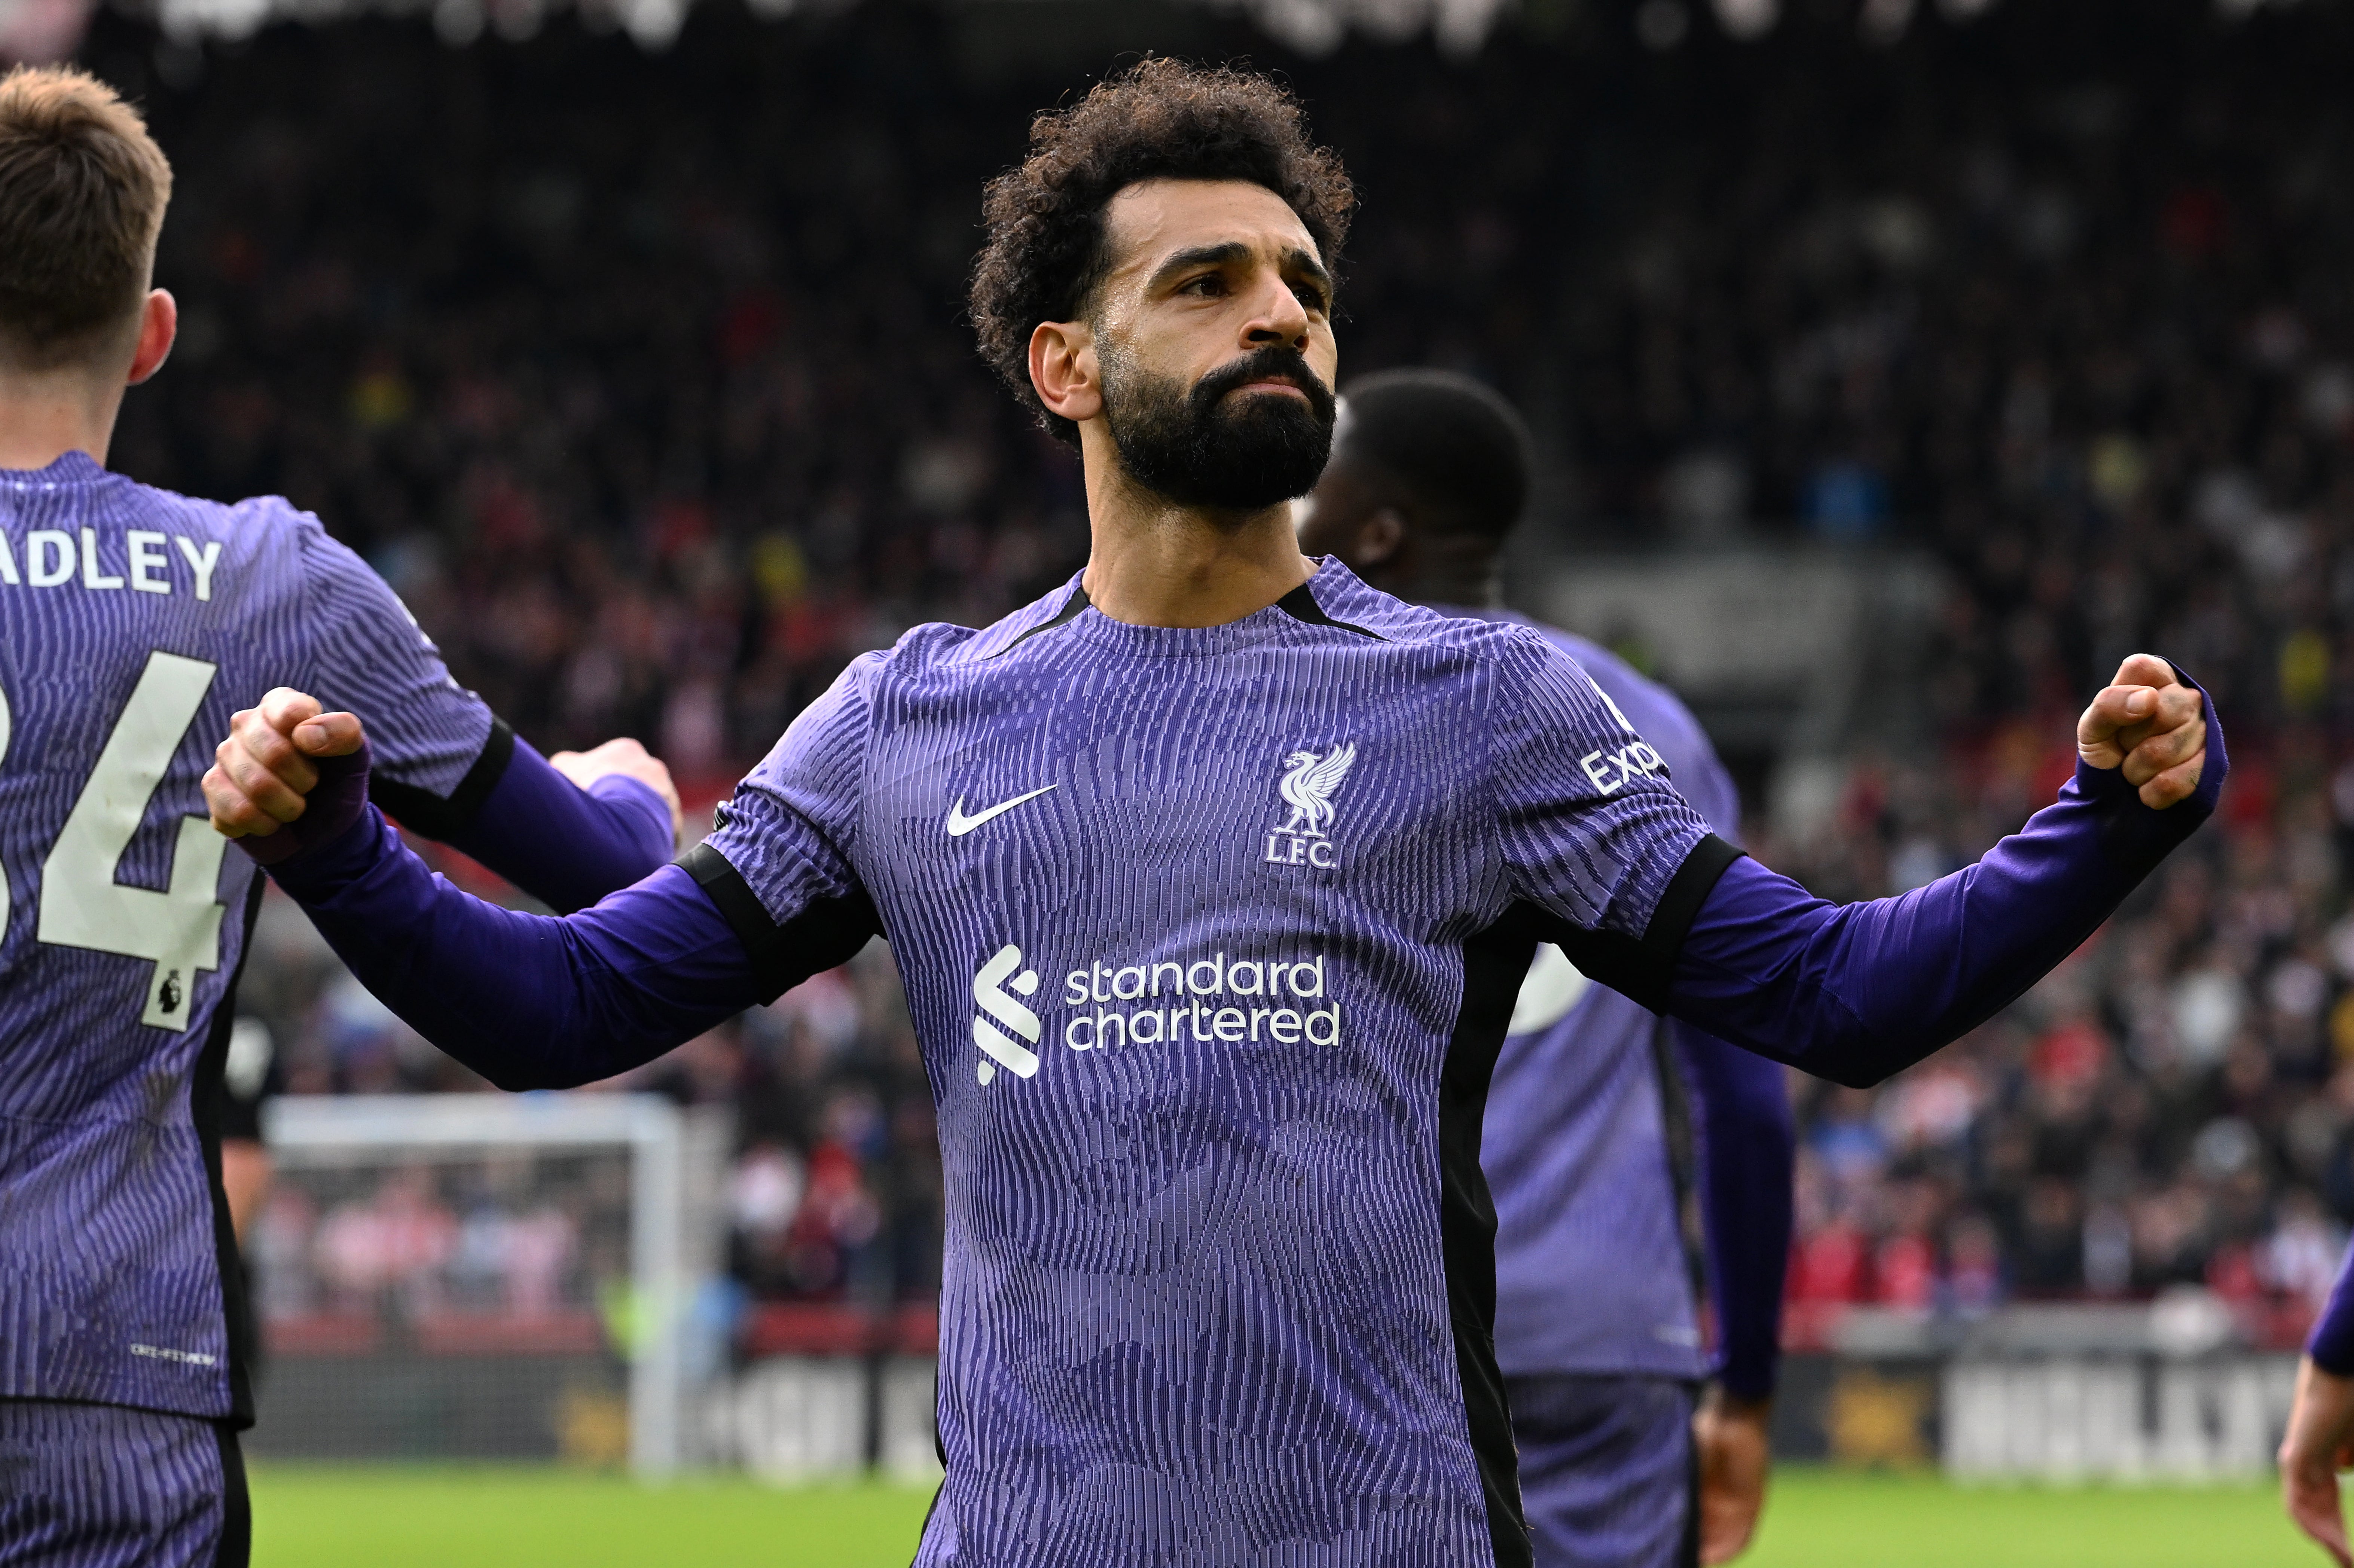 Mo Salah came off the bench to inspire Liverpool